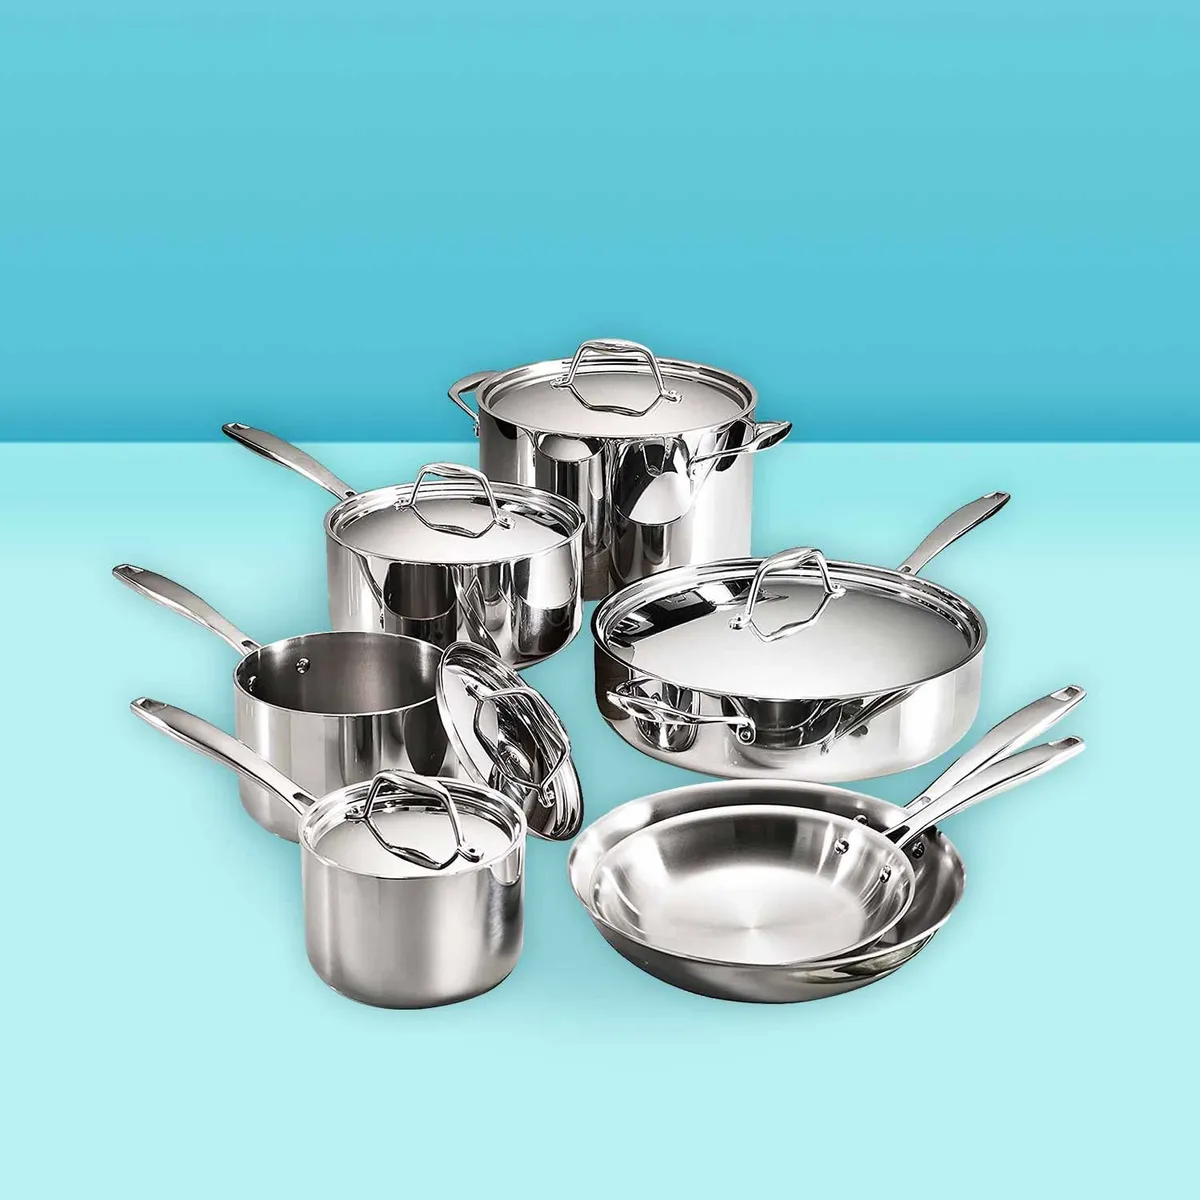 Best Stainless Steel Cookware Sets 2021